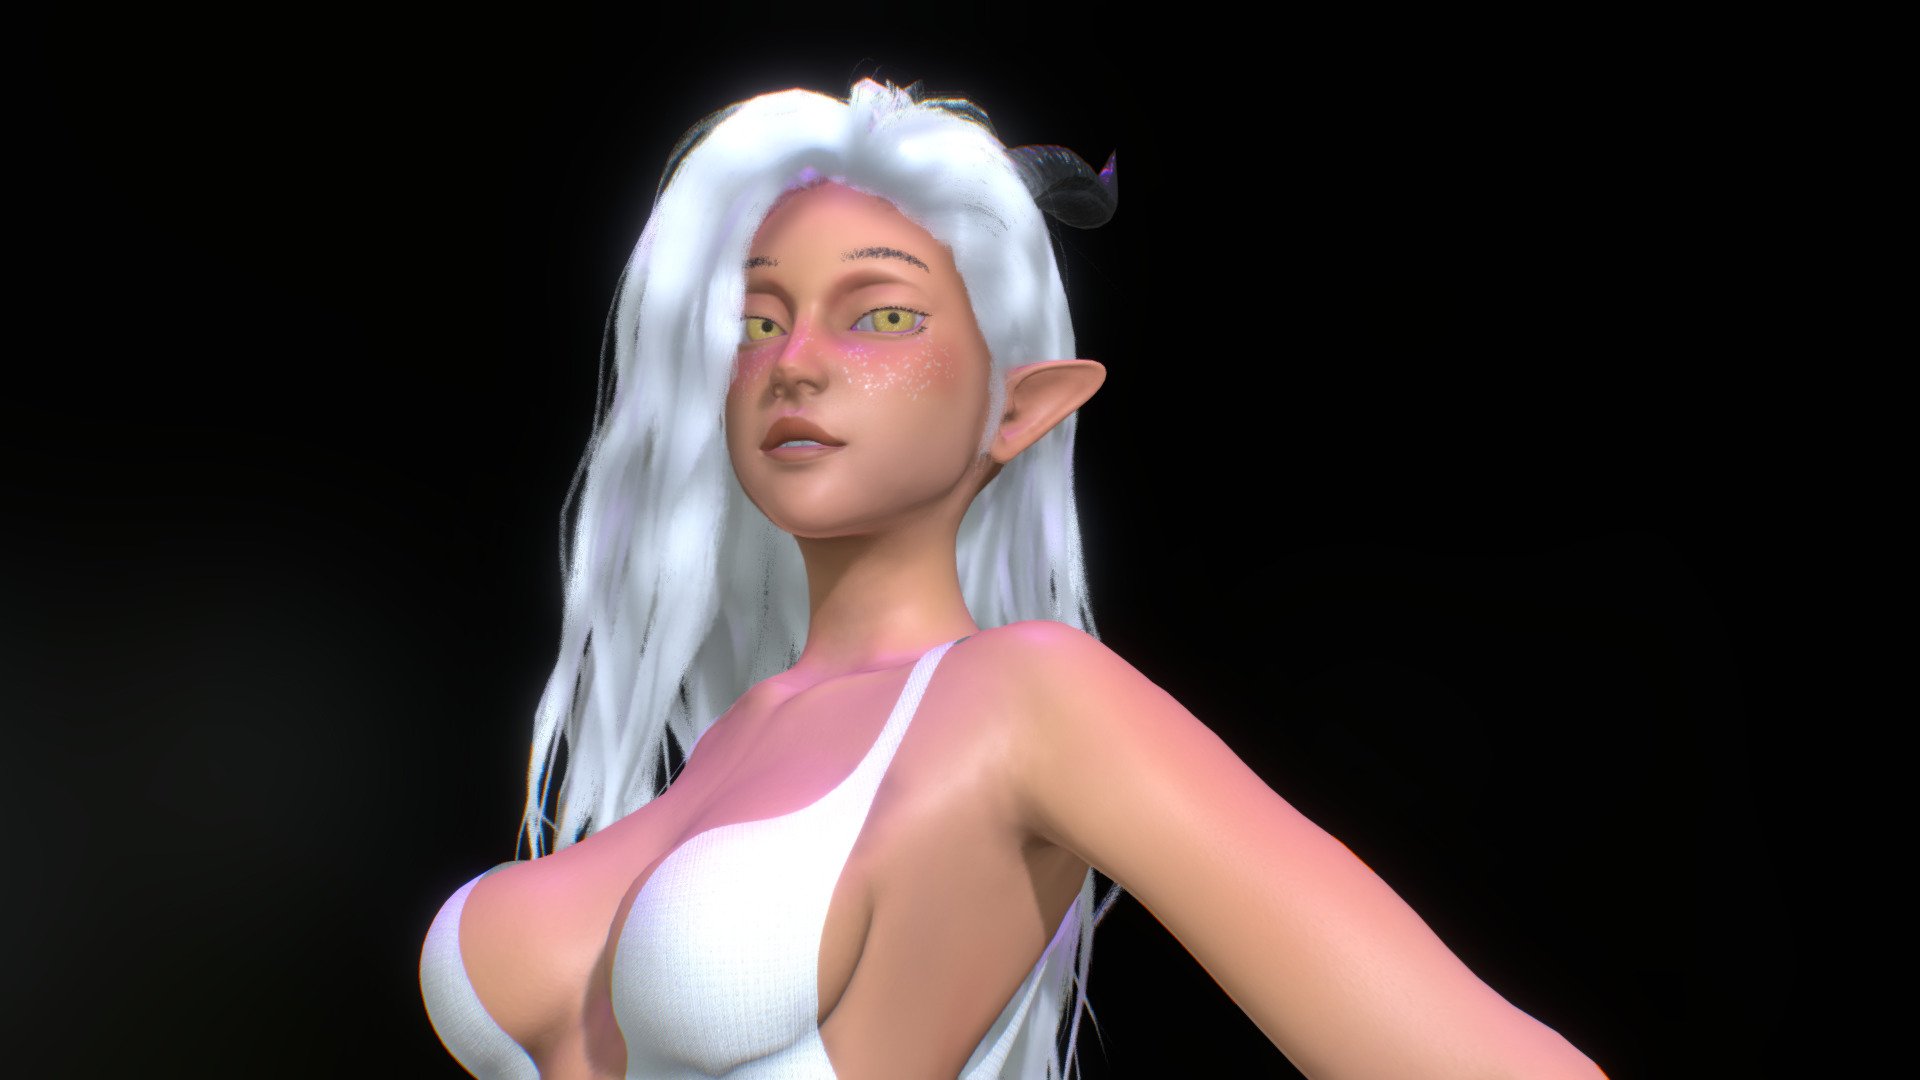 Madyaxx hosted a dtiys recently of her OC. So I decided to give it a go in my spare time.
Zbrush + substance + maya was used 3d model